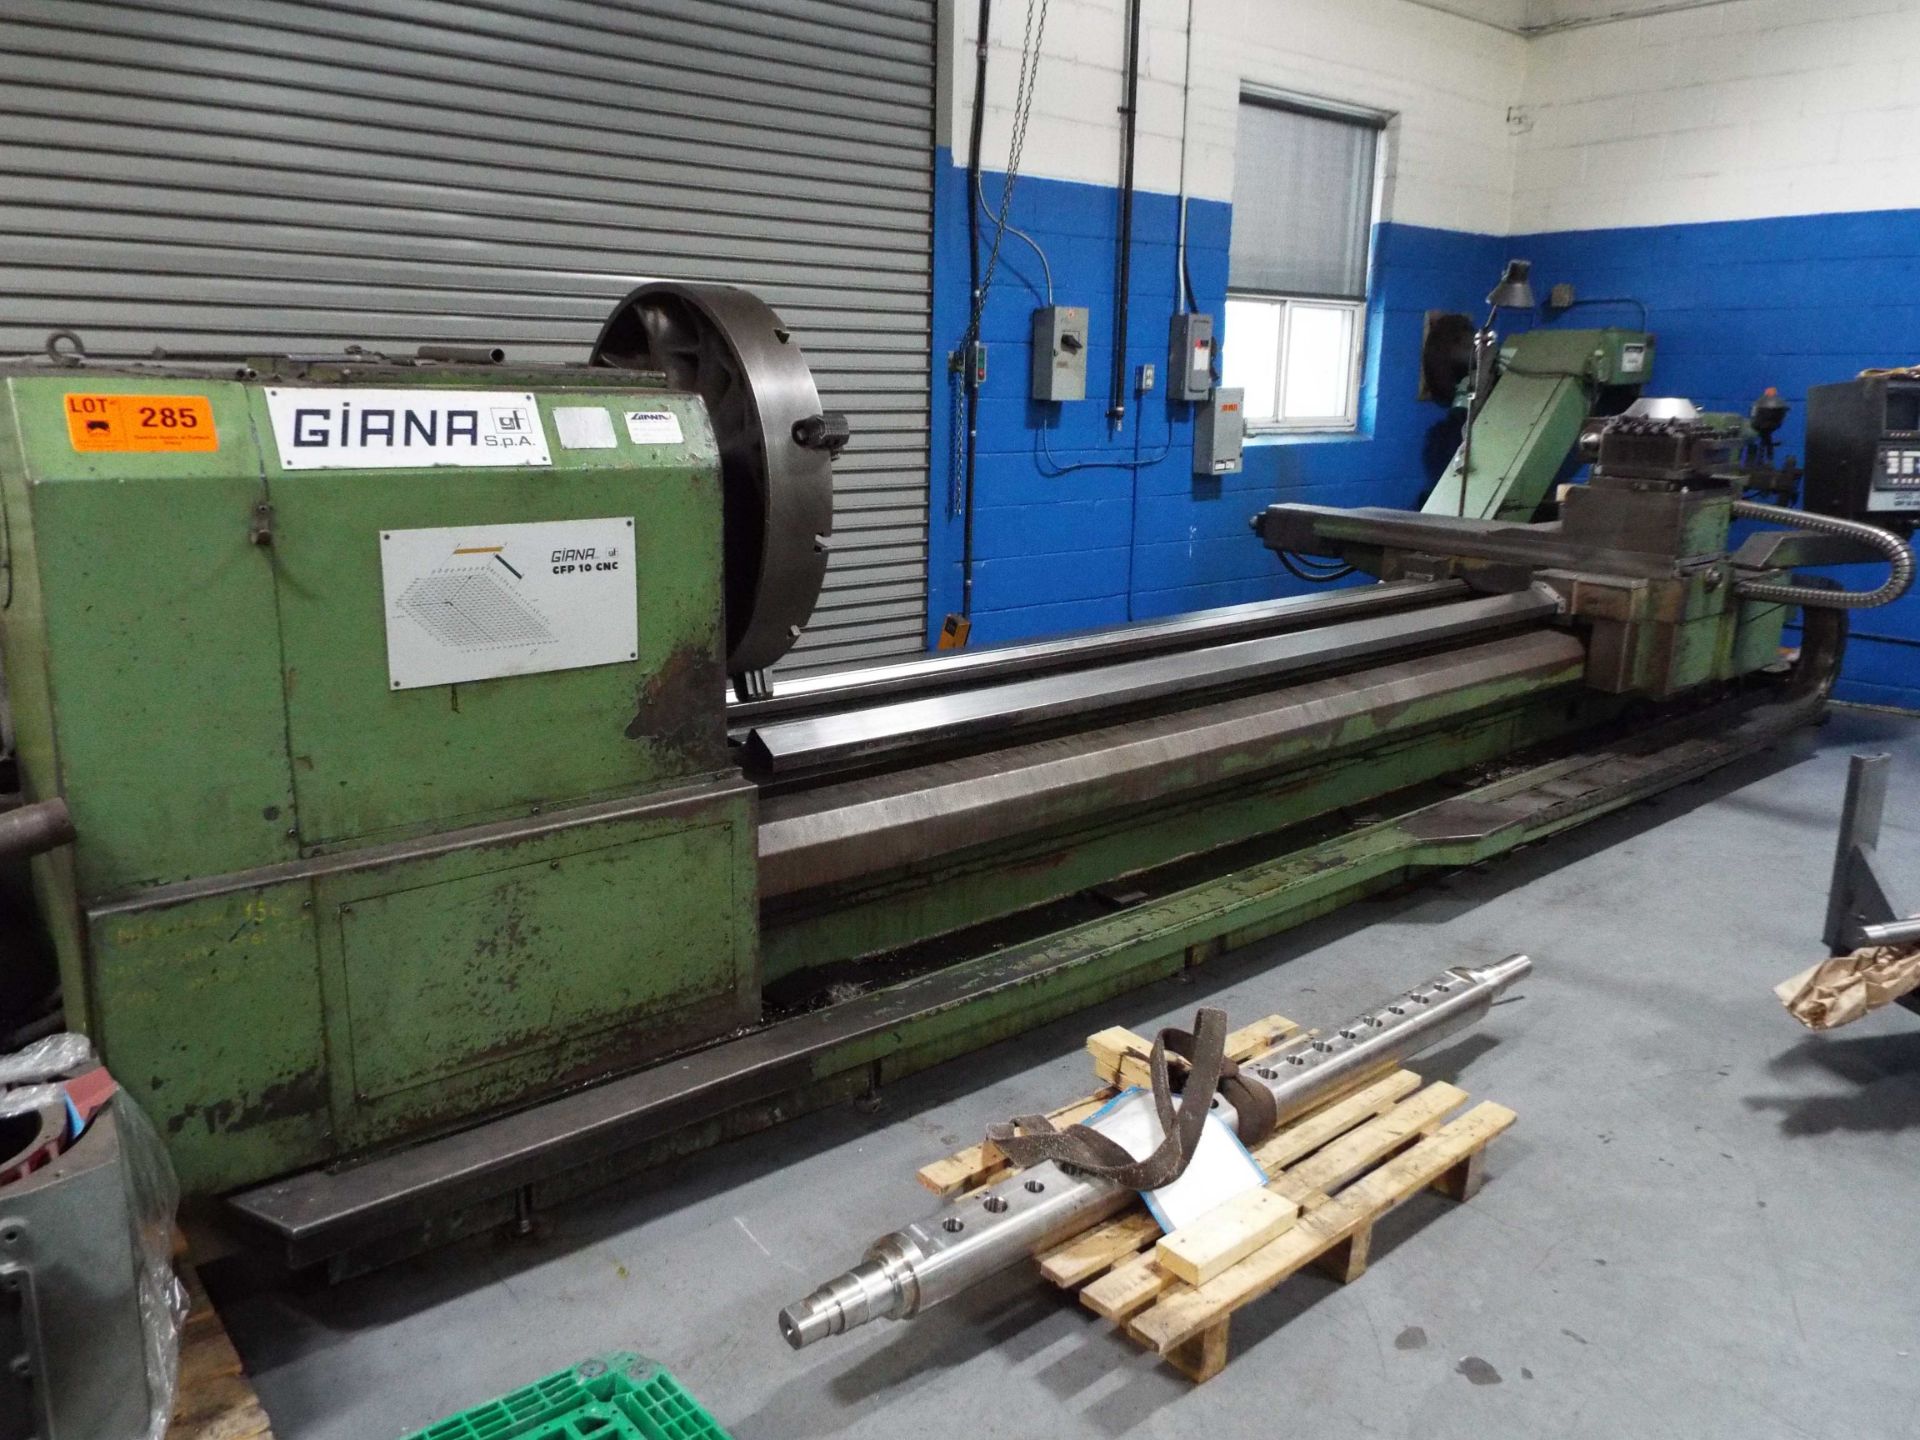 GIANA GFP 10 CNC LATHE WITH GE FANUC OT CNC CONTROL, 20" SWING OVER BED, 156" BETWEEN CENTERS, 4.75"